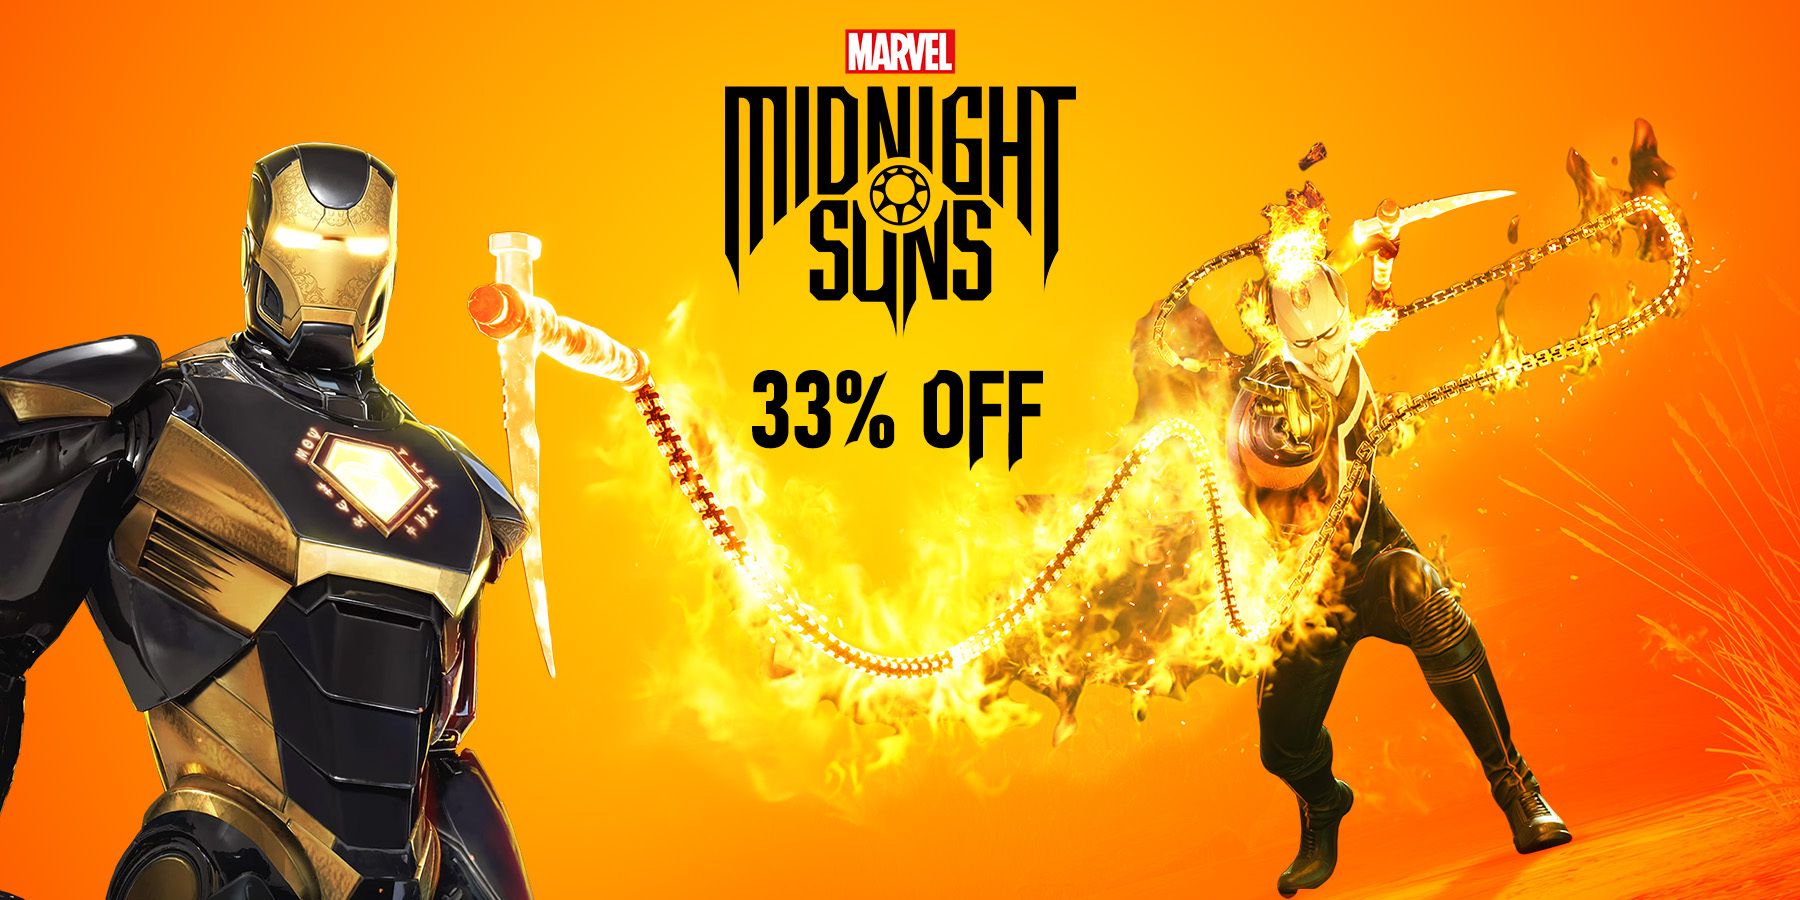 A month after release, Marvel's Midnight Suns is 33% off on all